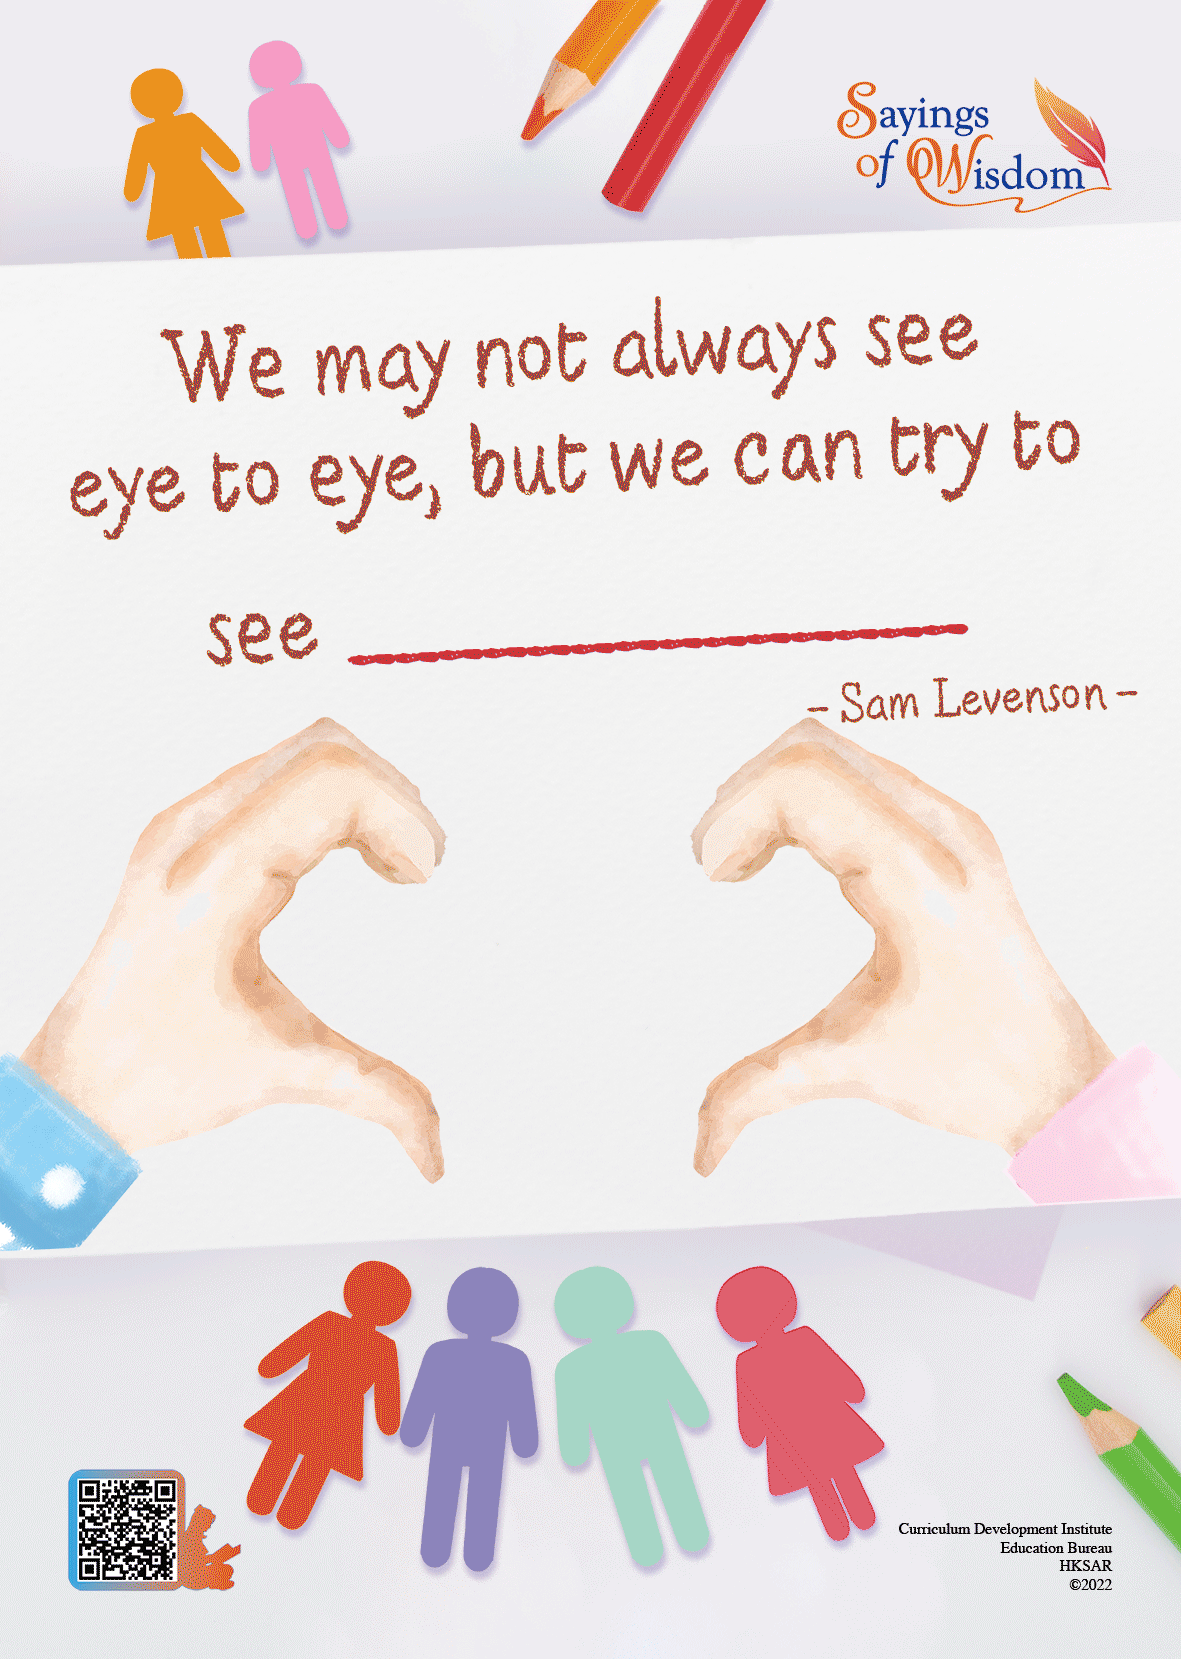 We may not always see eye to eye, but we can try to see heart to heart.